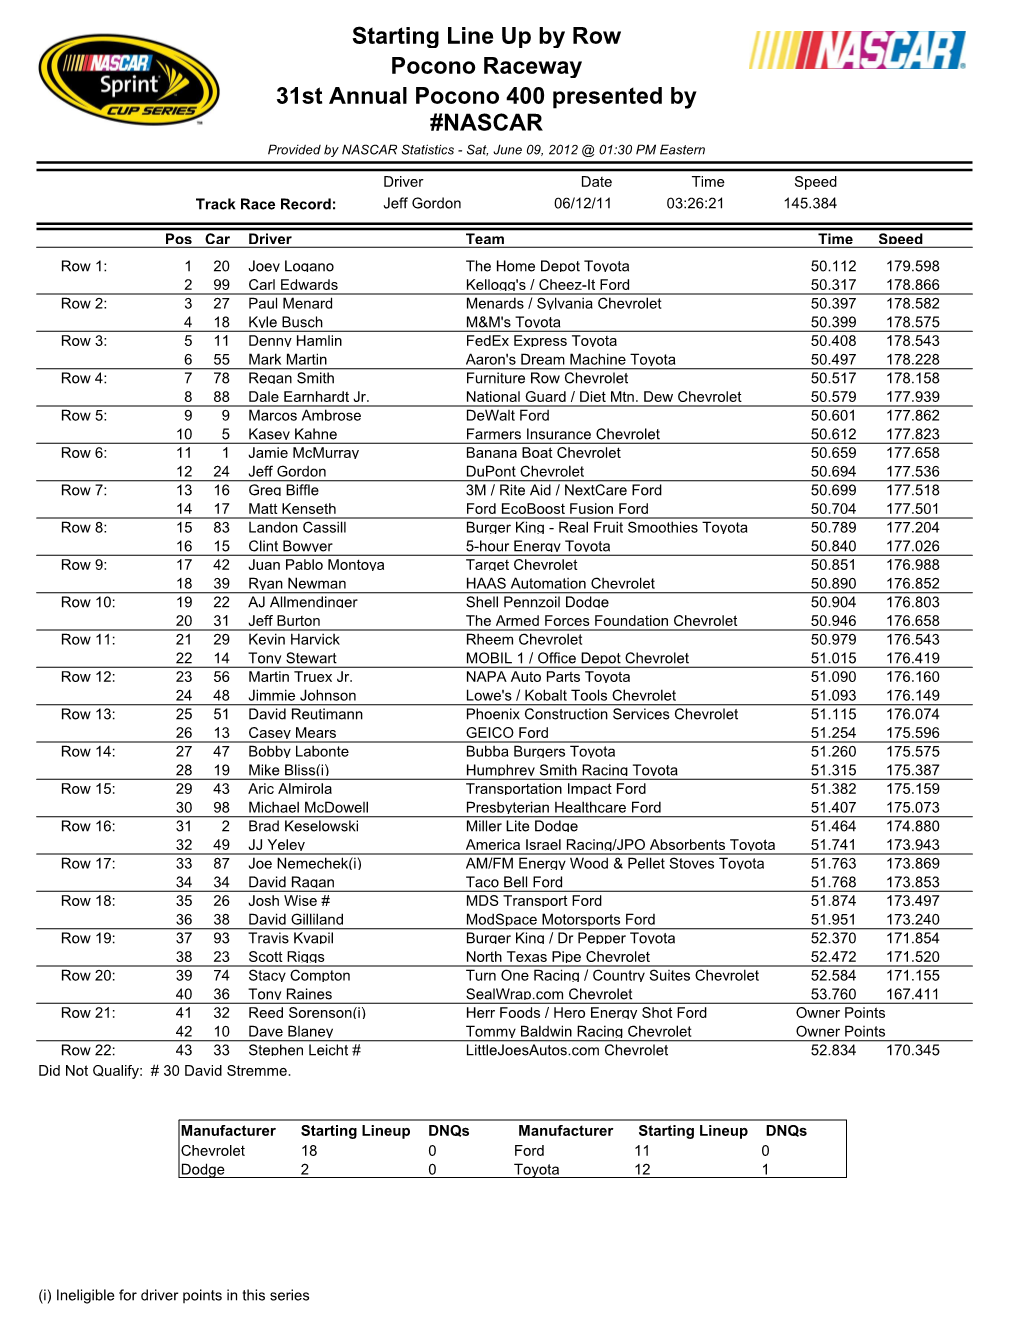 Starting Line up by Row Pocono Raceway 31St Annual Pocono 400 Presented by #NASCAR Provided by NASCAR Statistics - Sat, June 09, 2012 @ 01:30 PM Eastern